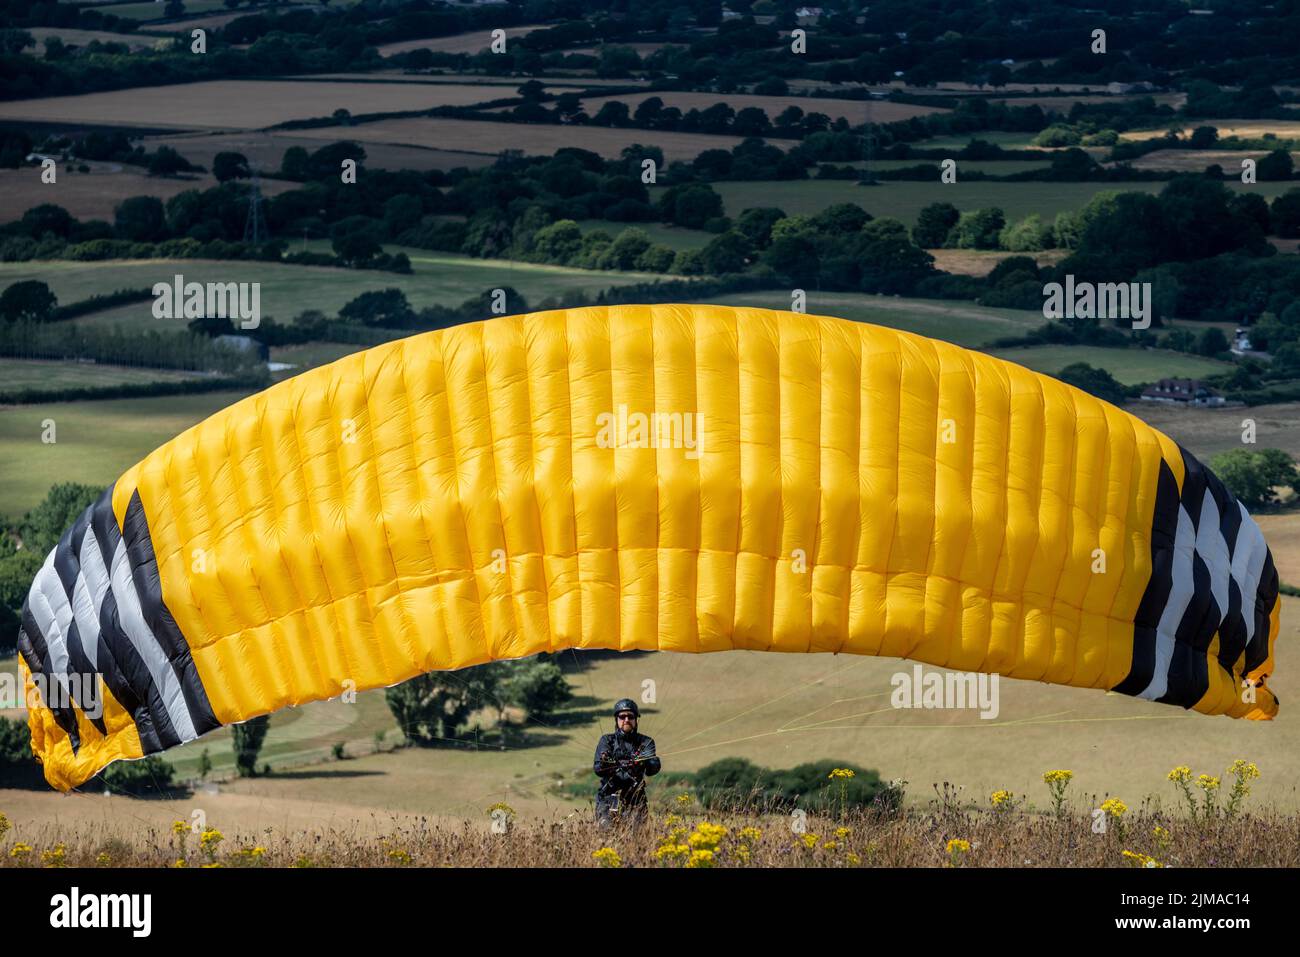 Brighton, August 5th 2022: Paragliders preparing for take-off at Devil's Dyke, in the South Downs National Park, near Brighton, East Sussex Credit: Andrew Hasson/Alamy Live News Stock Photo